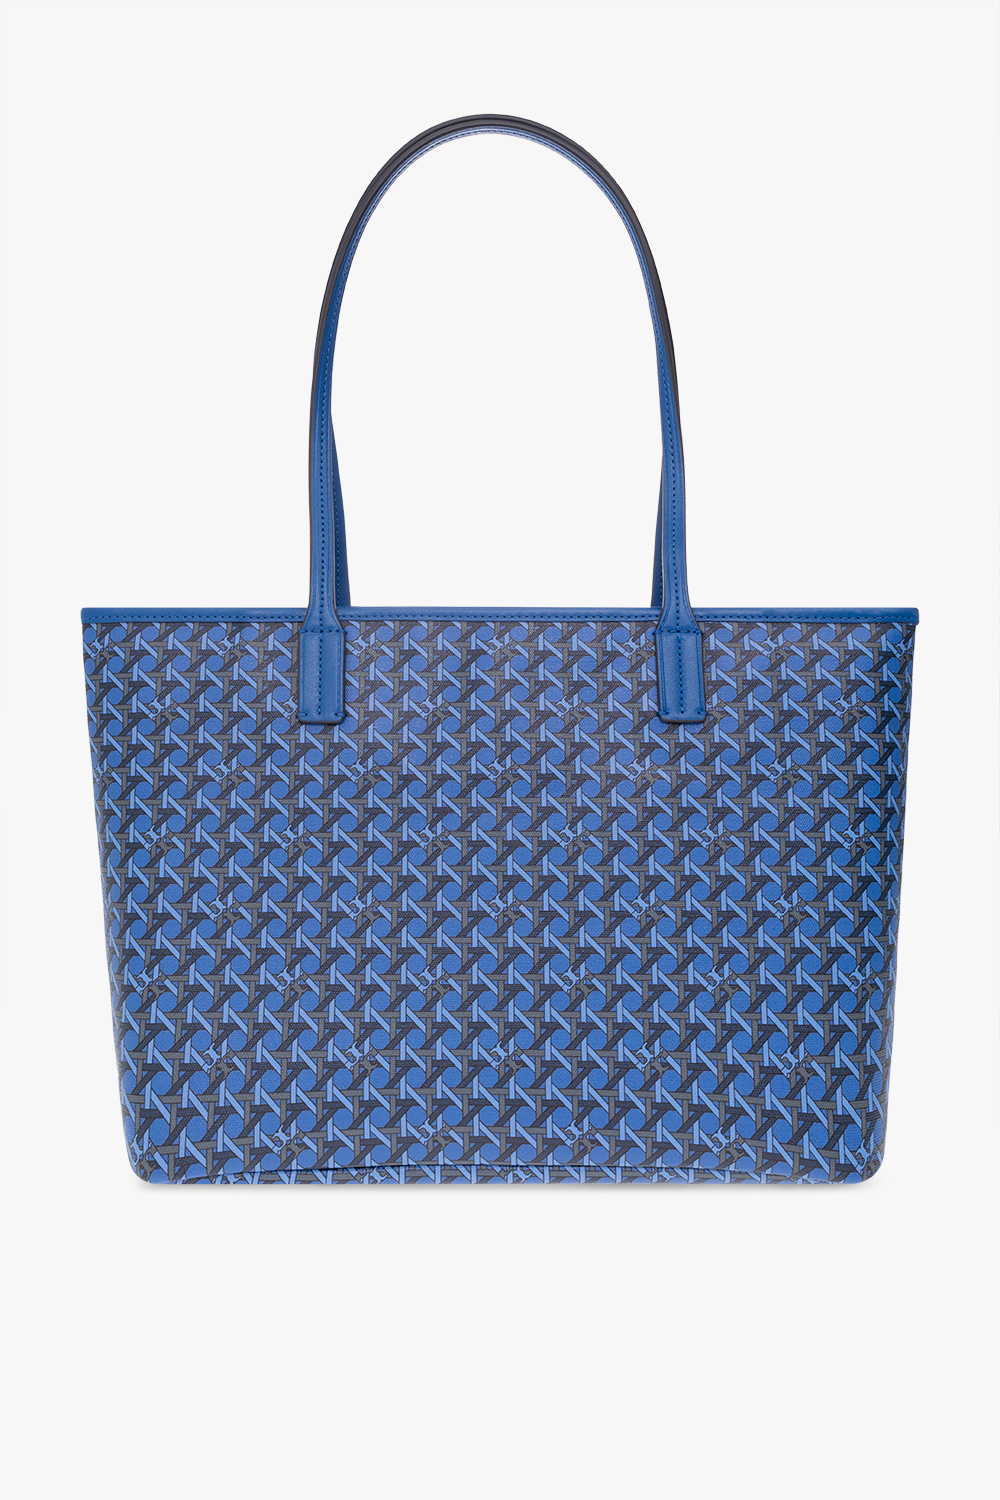 Goyard Voltaire Tote Bag Navy Pre-Owned from Japan